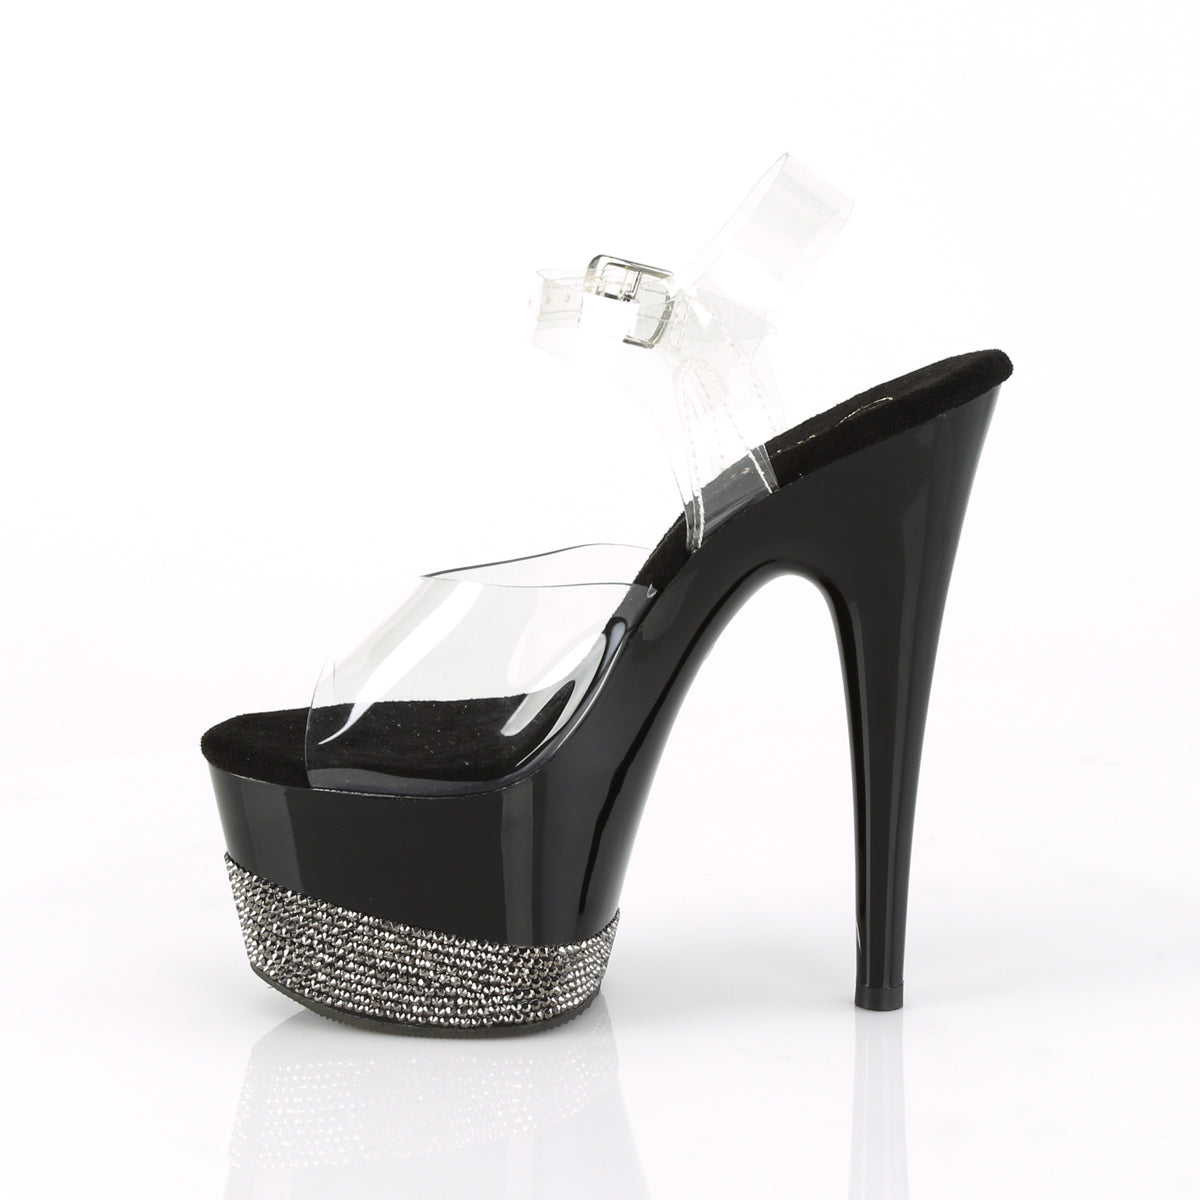 ADORE-708-3 Heels ClearBlack Pewter Bling Pole Dancing Shoes-Pleaser- Sexy Shoes Pole Dance Heels